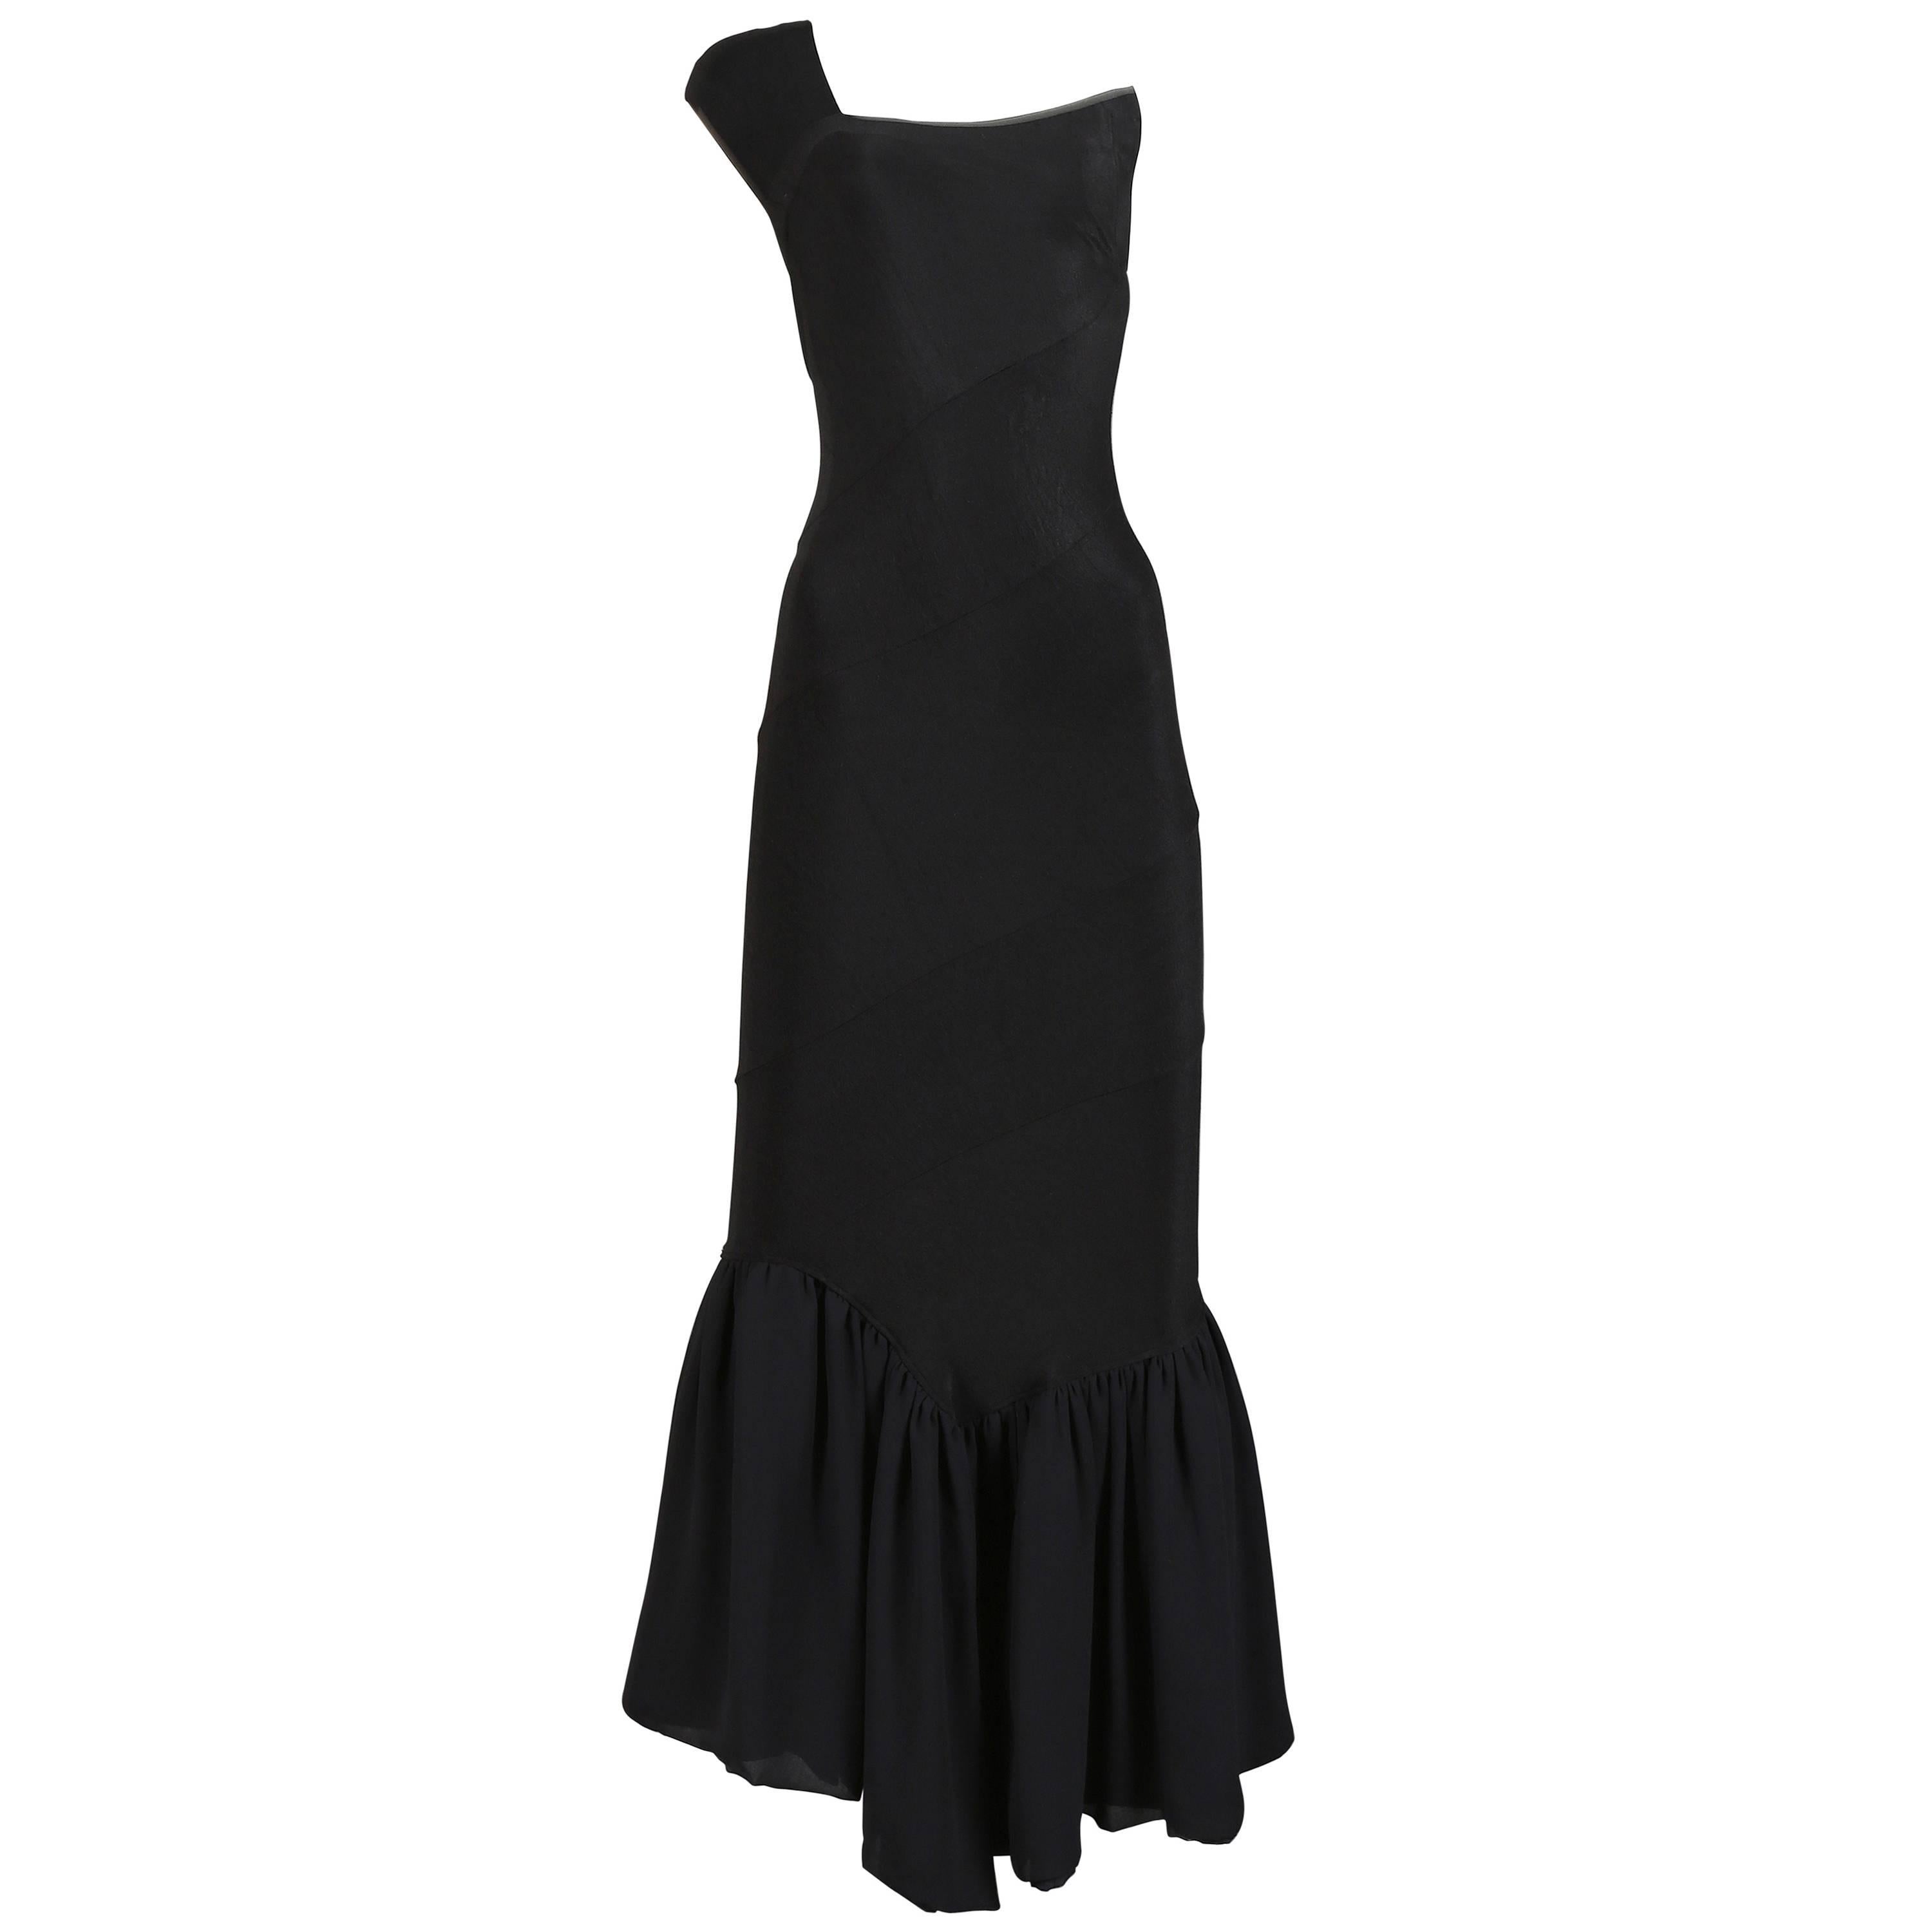 Comme des Garcons bias cut knitted gown with fish tale skirt, circa 1986